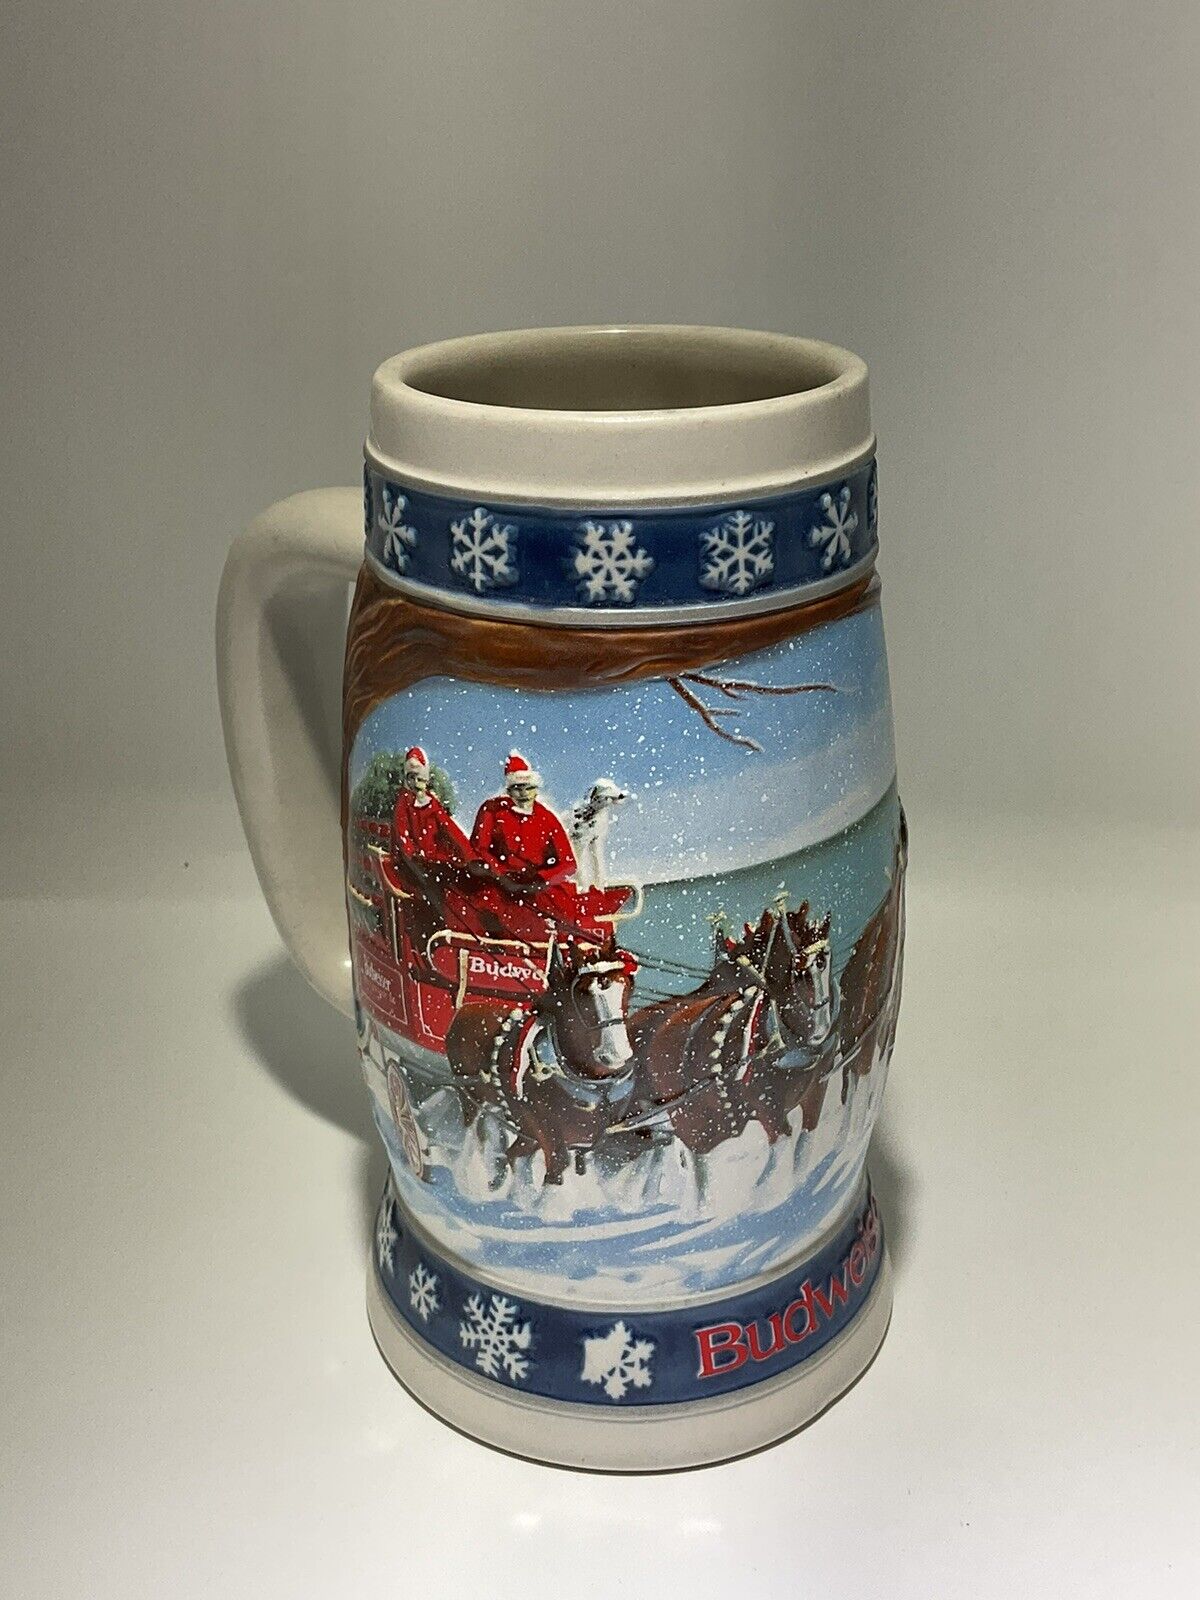 1995 Budweiser Holiday Beer Stein Lighting the Way Home Clydesdales